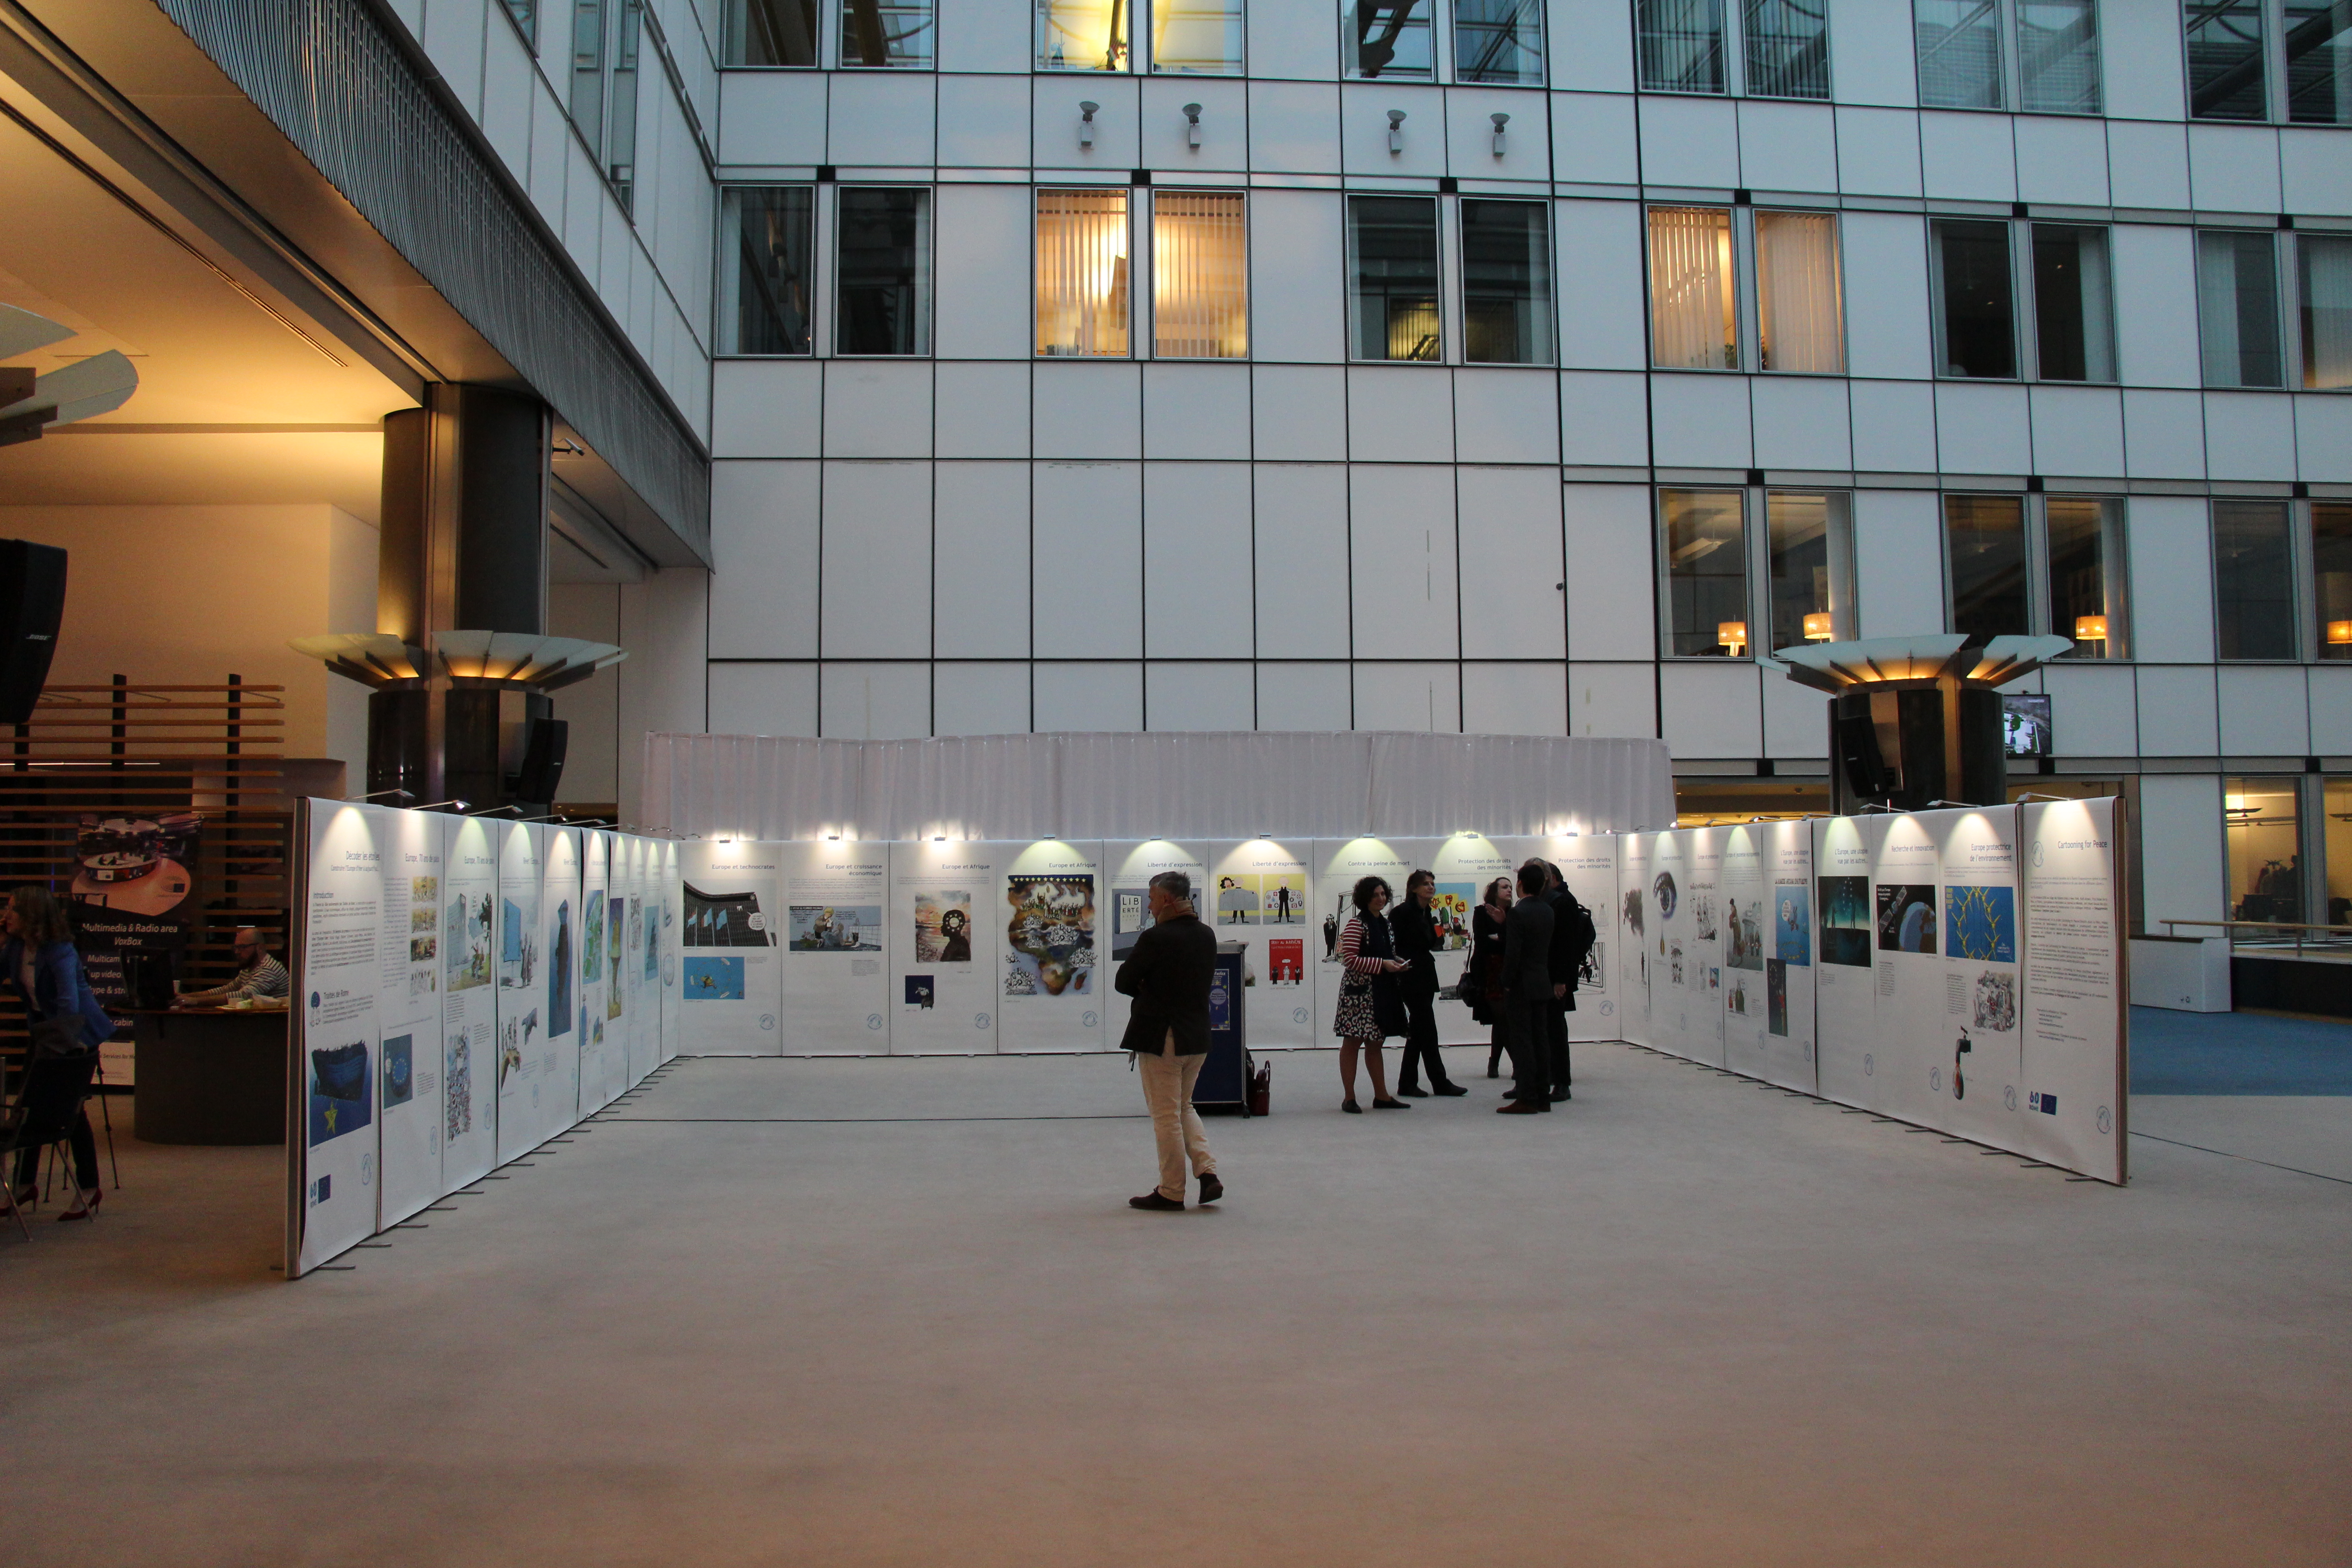 View of the exibition “Decoding the stars”